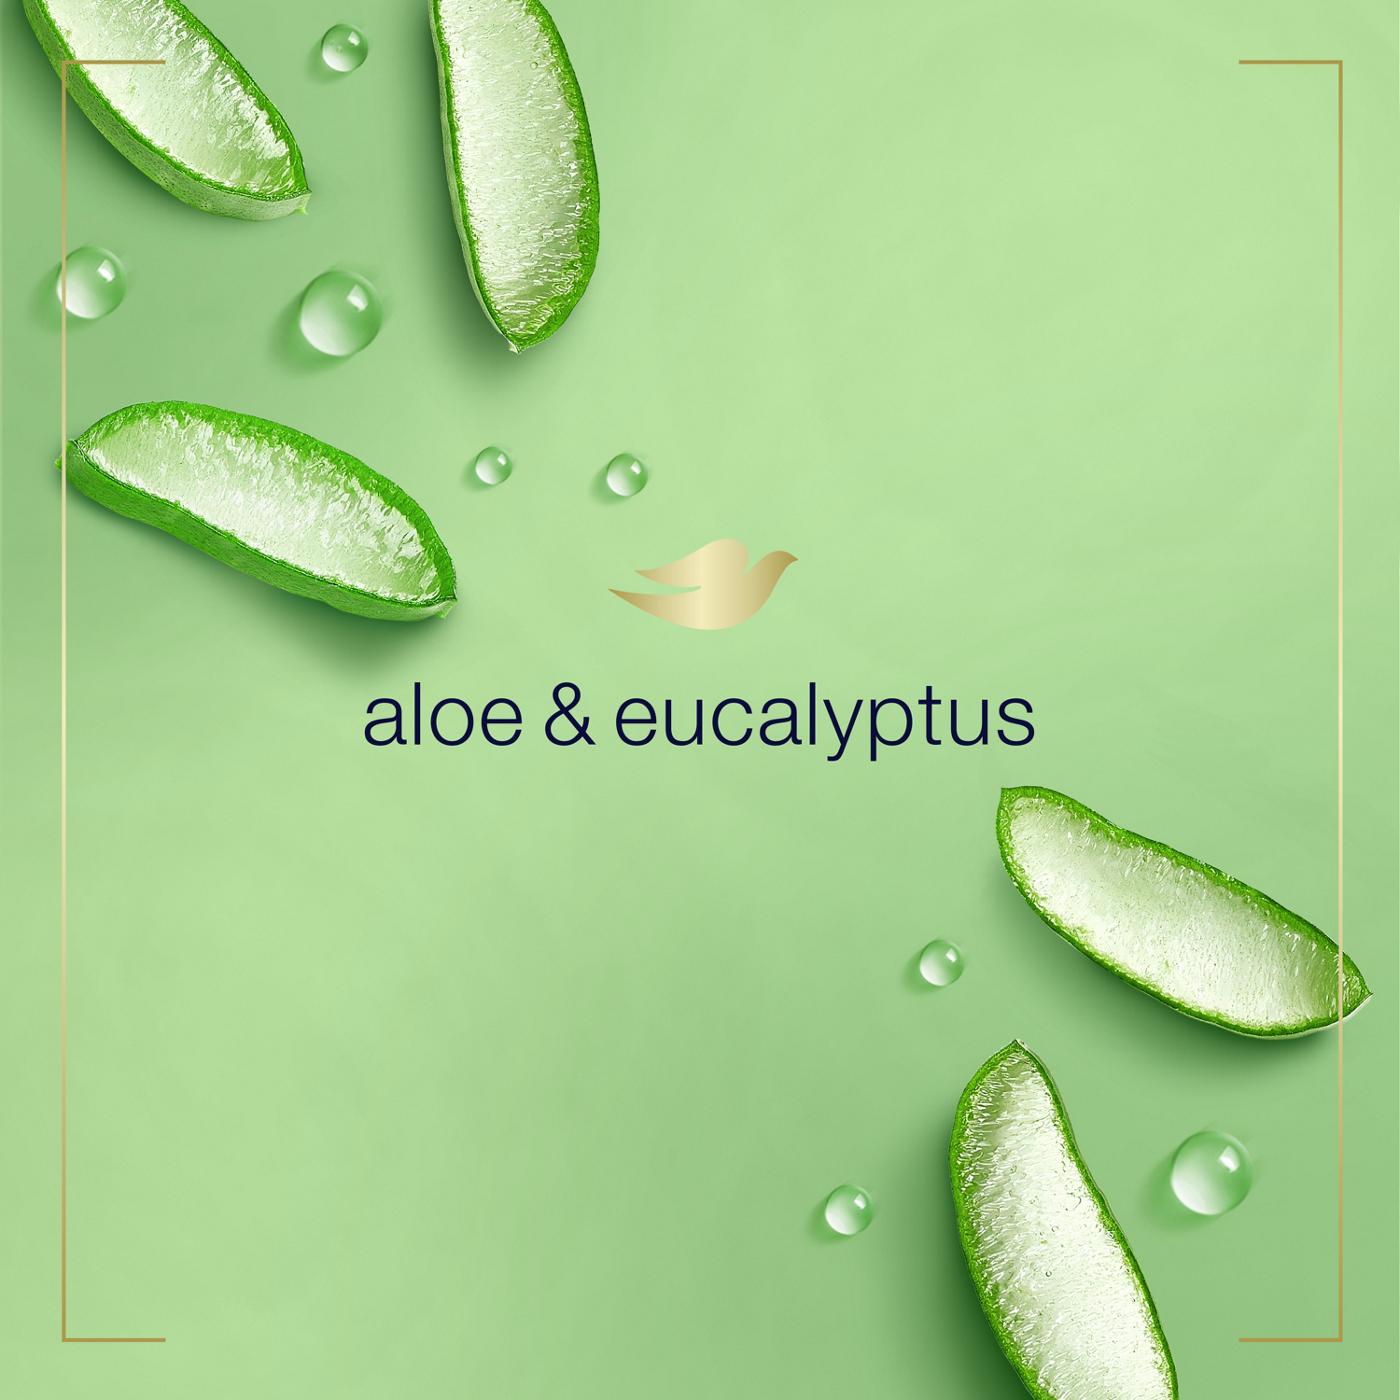 Dove Aloe & Eucalyptus Protects Skin from Dryness; image 8 of 10